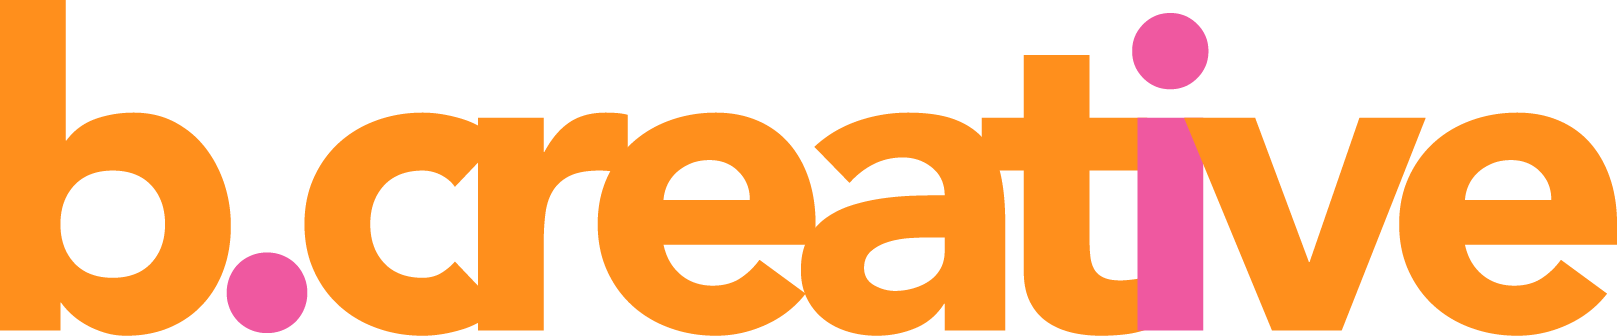 The Creative Tracks Launch Event - Nickelodeon Logo Png (1617x336)